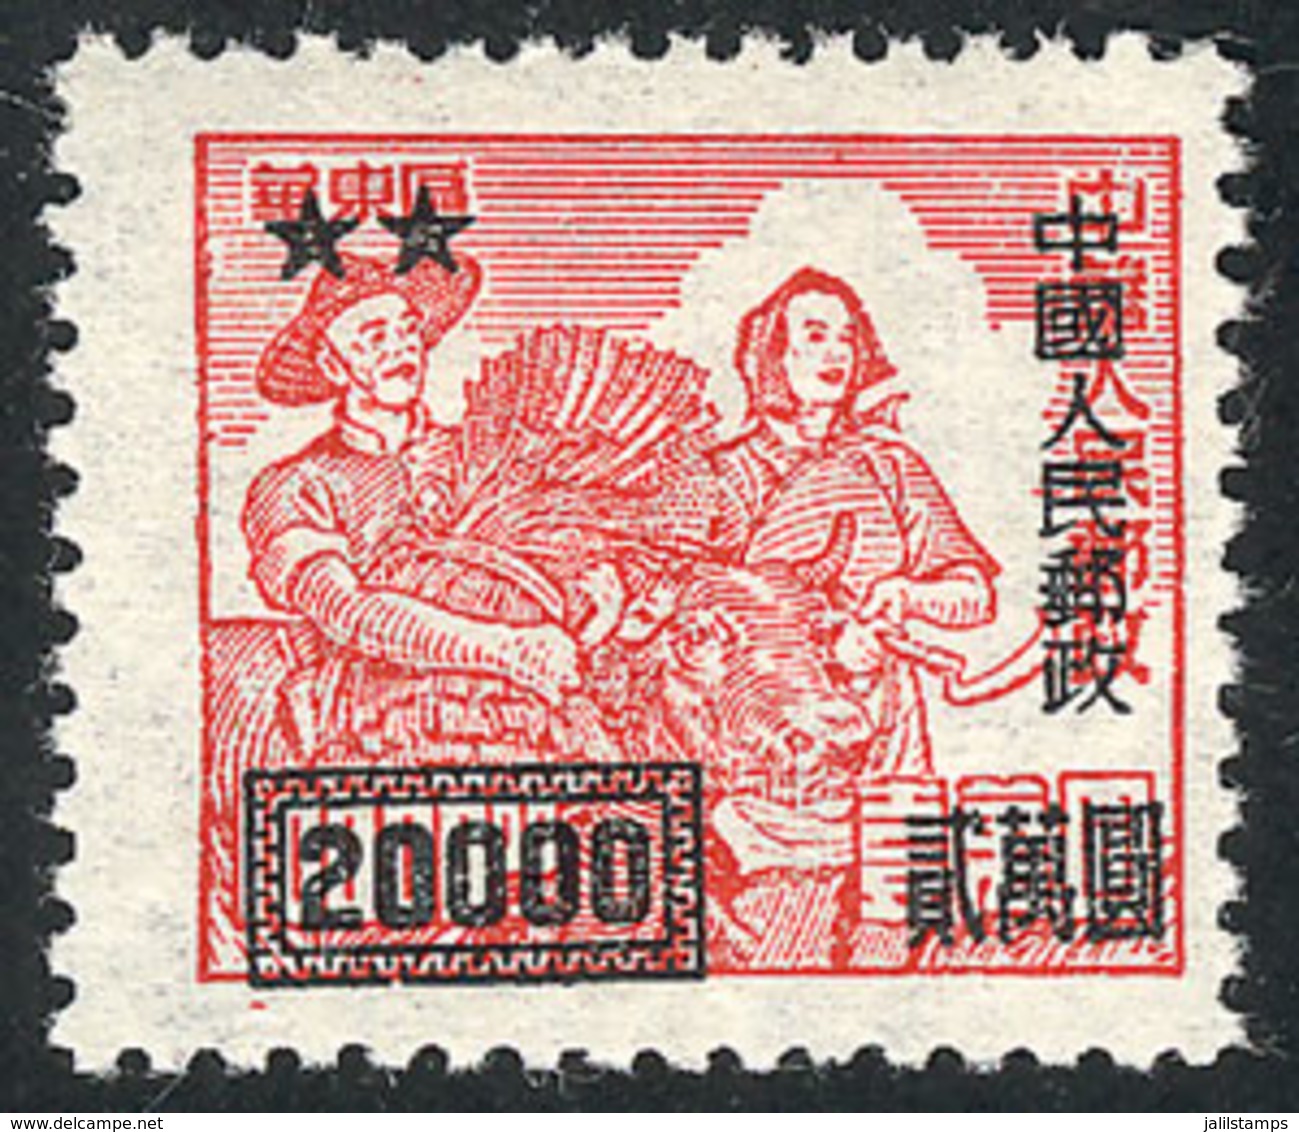 CHINA: Sc.30 (Yvert 896), 1950 Harvesters, Unissued Stamp Of East China With 20000$ Overprint, MNH (issued Without Gum), - Gebruikt